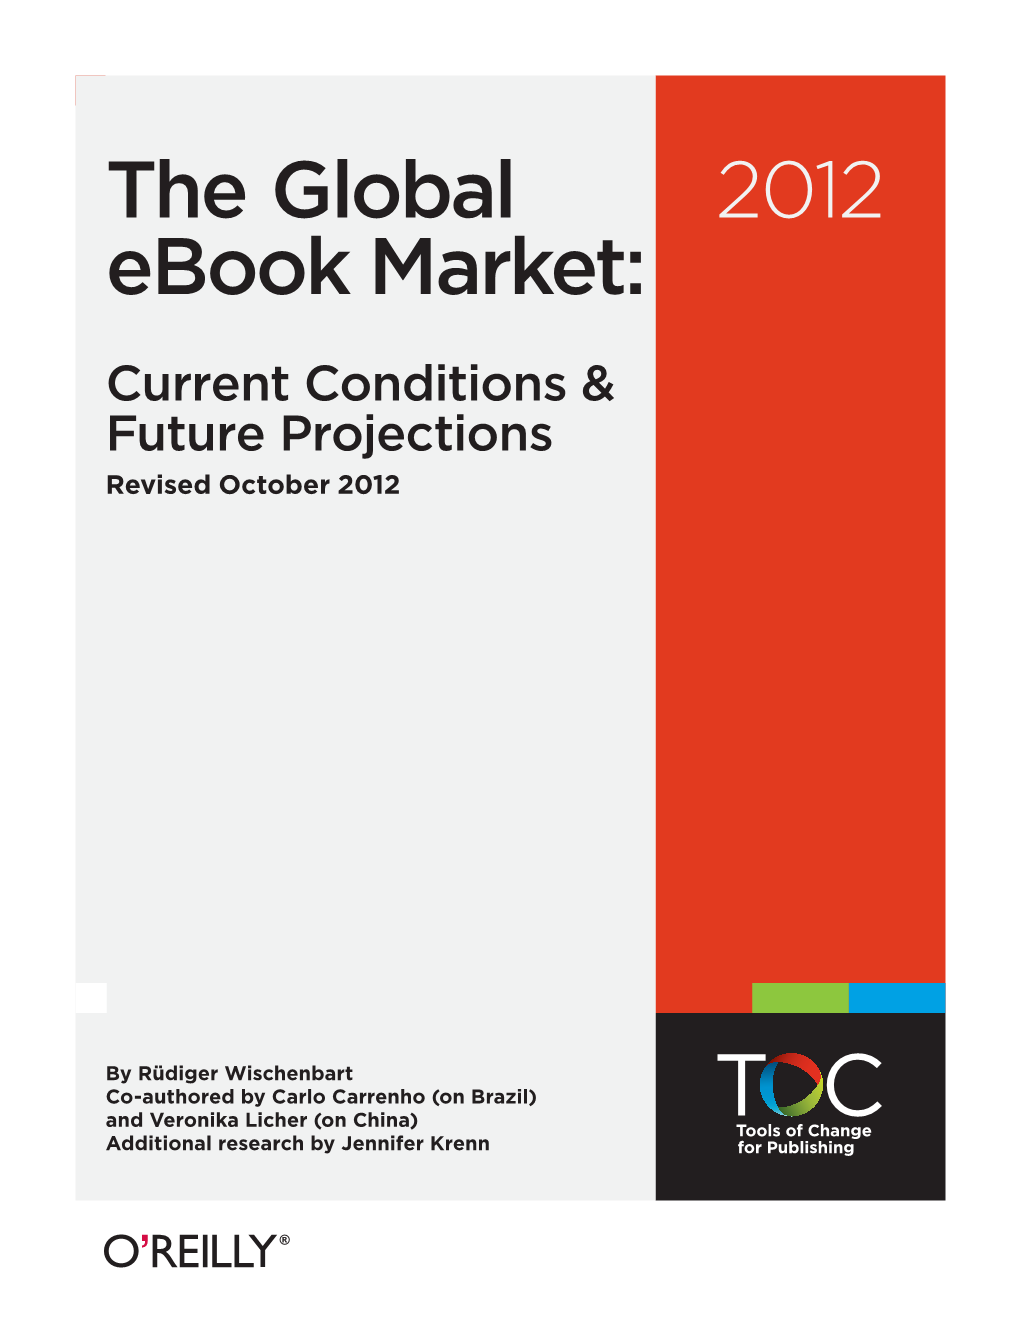 The Global Ebook Market: Current Conditions & Future Projections Contents